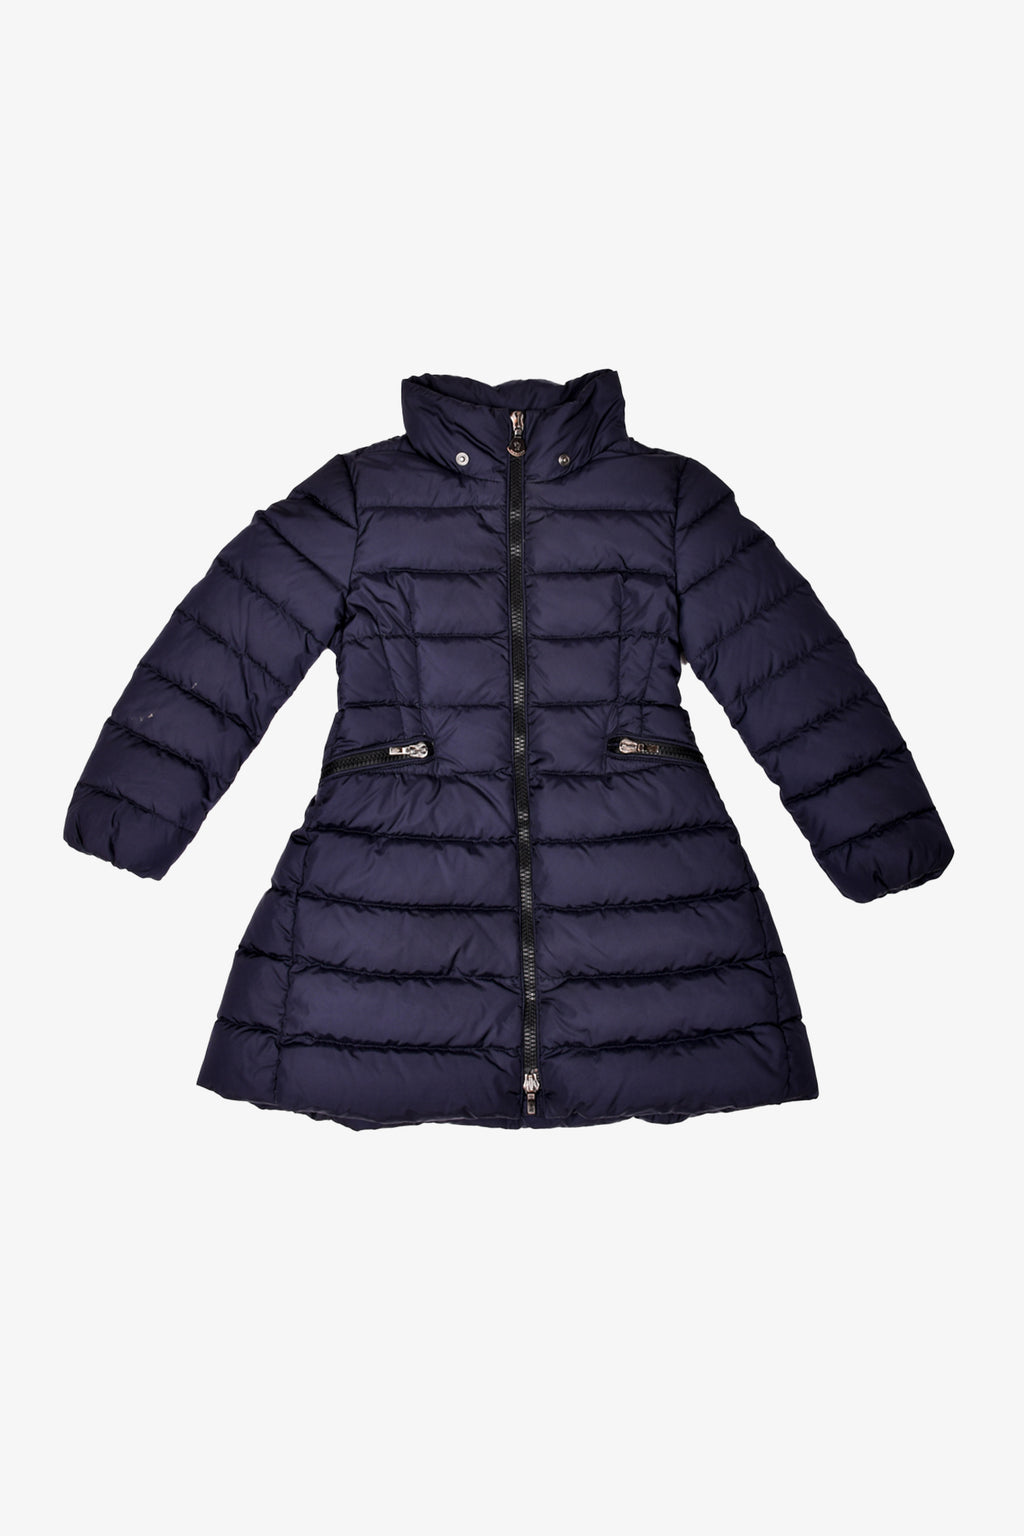 Moncler Navy Blue Quilted Puffer Jacket with Peplum Waist Size 4Y